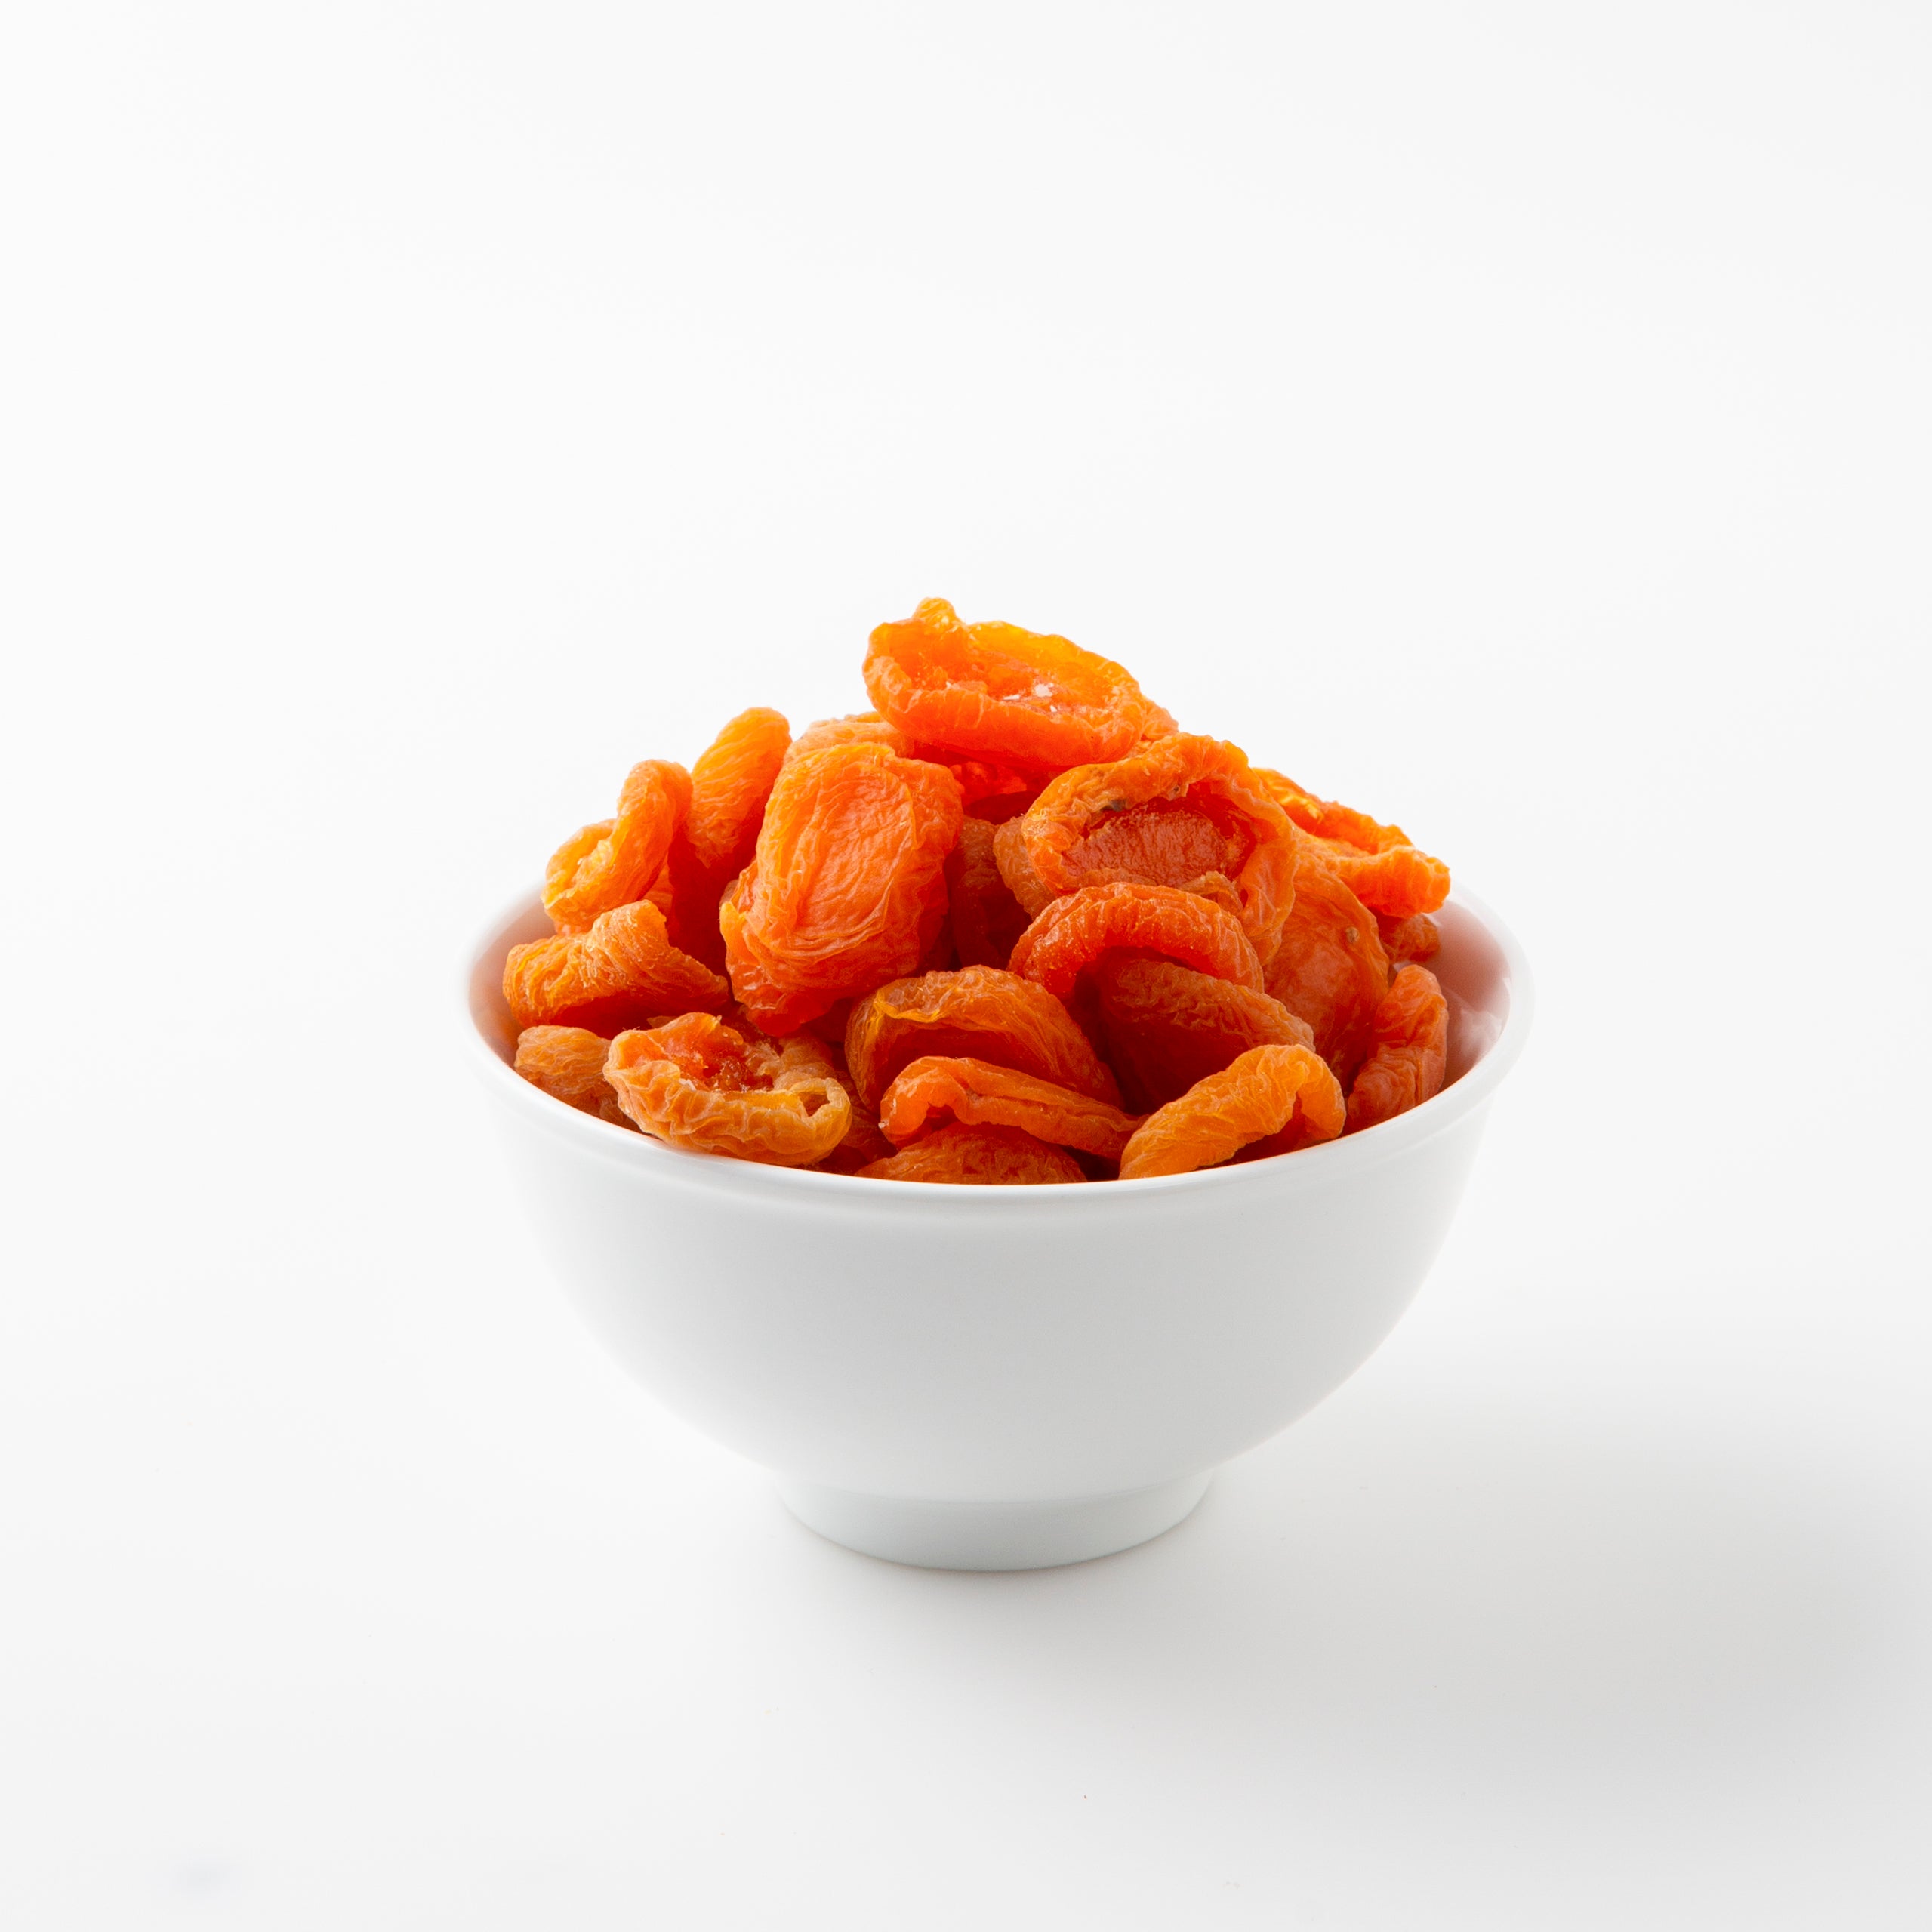 Dried Australian Apricots (Dried Fruits) Image 3 - Naked Foods